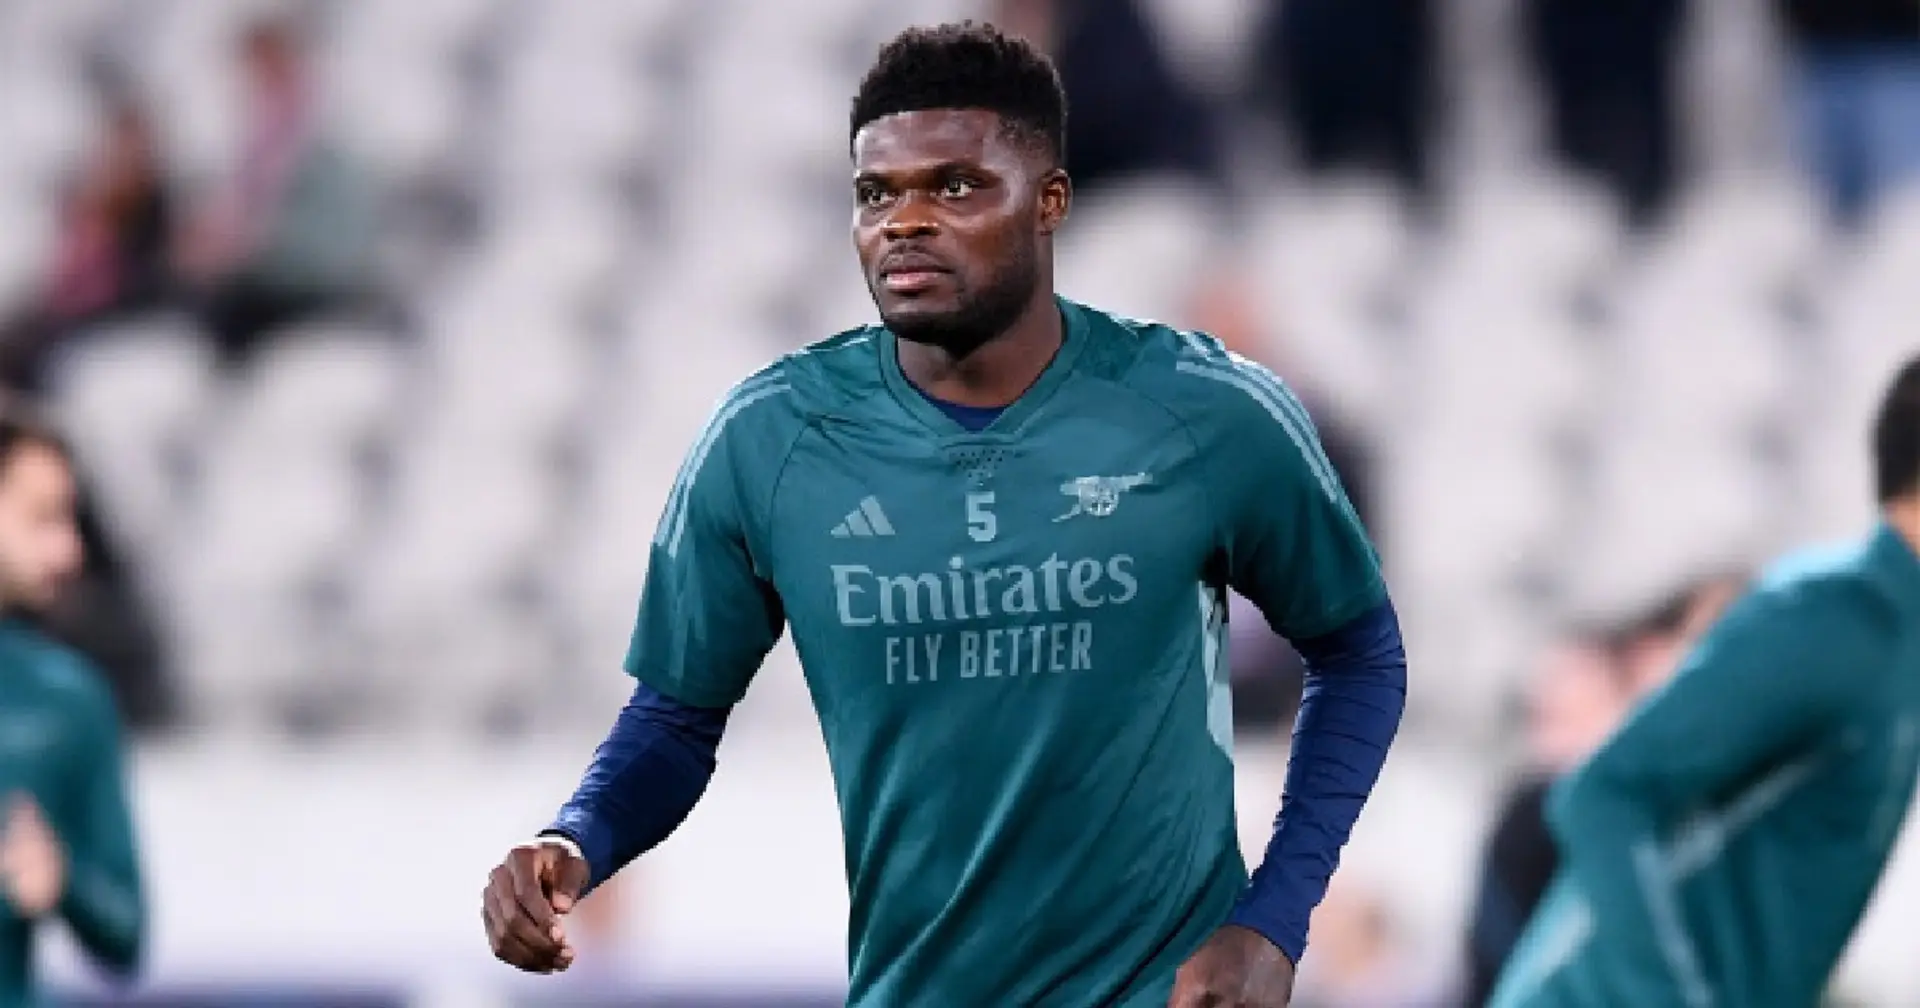 Barcelona 'interested' in Thomas Partey 